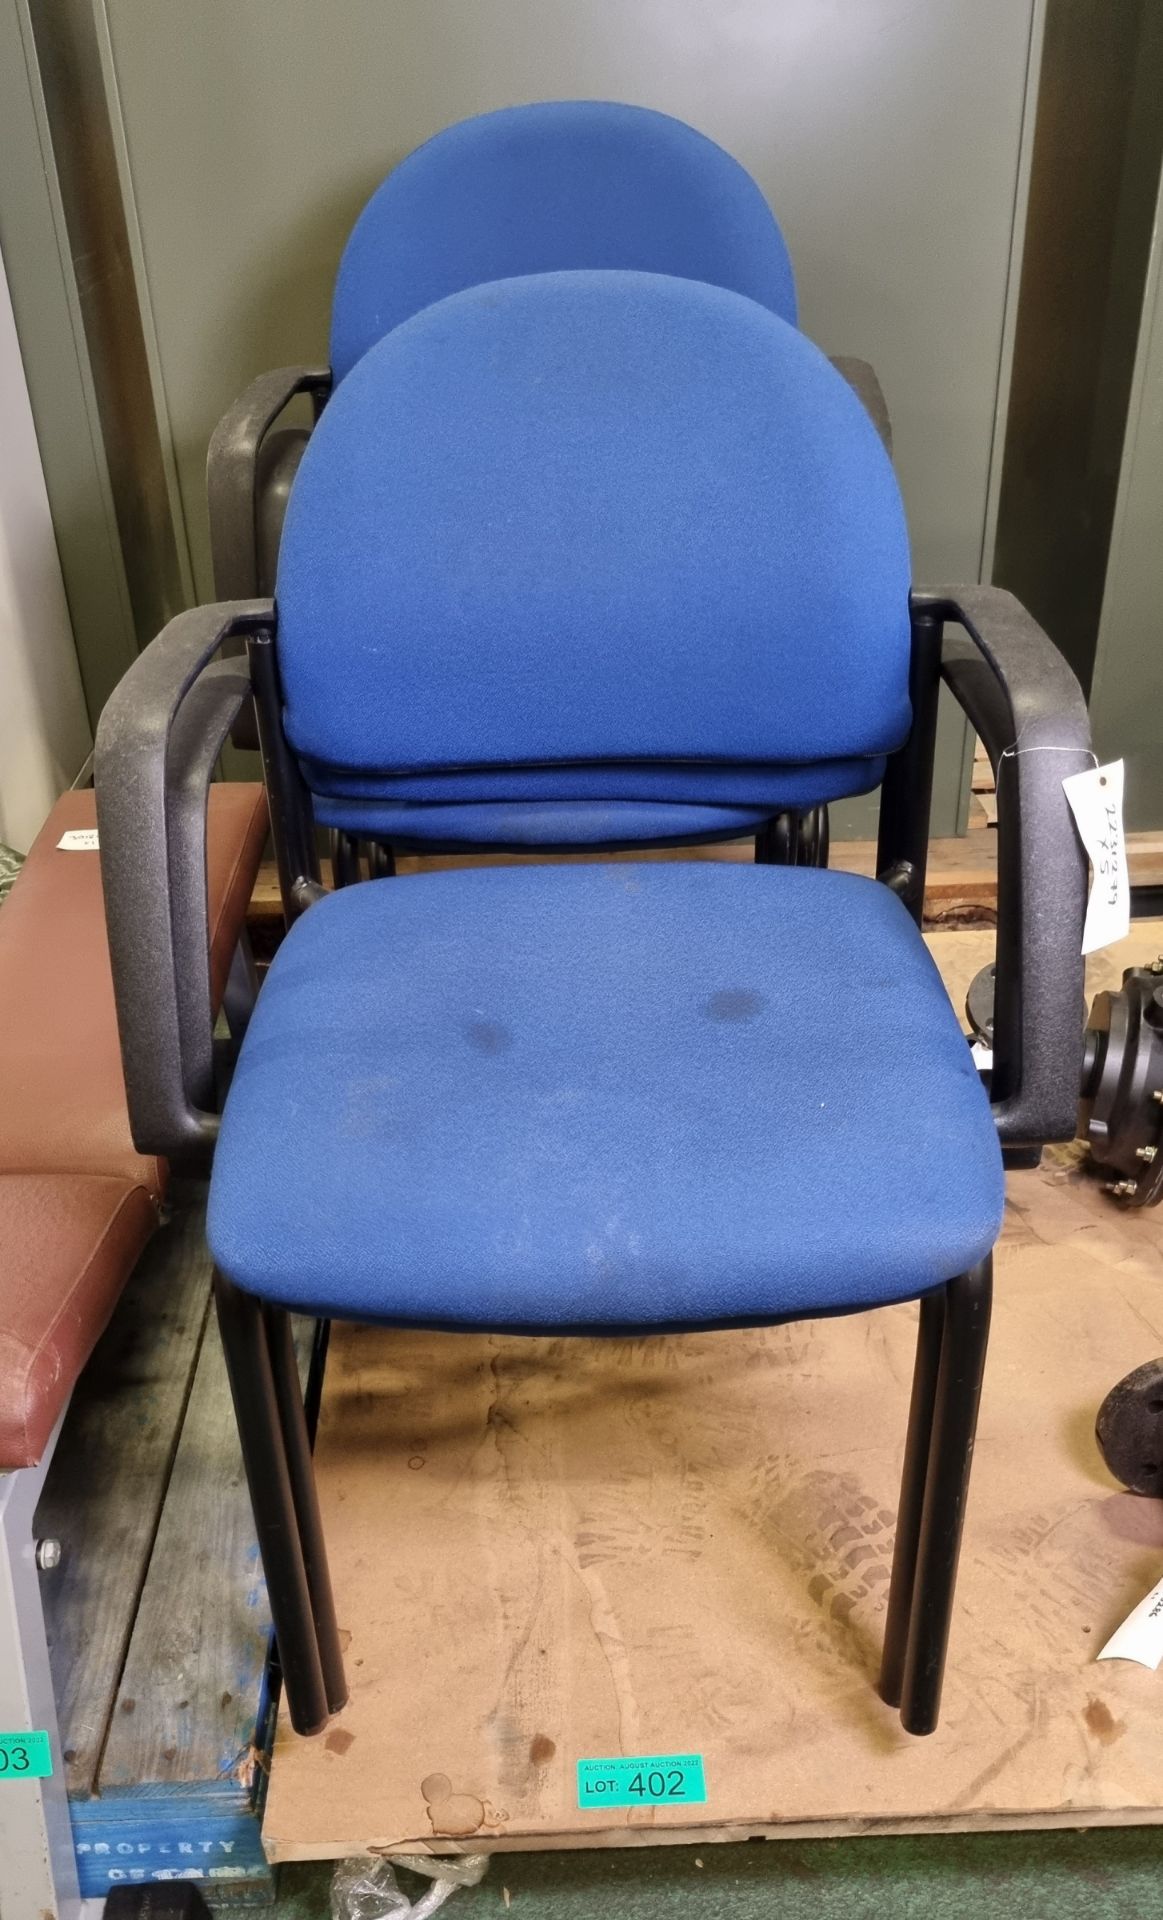 5x Stacking chairs 7110-99-3540513-YS005 L 60 x W 60 x H 86 cm - Image 2 of 3